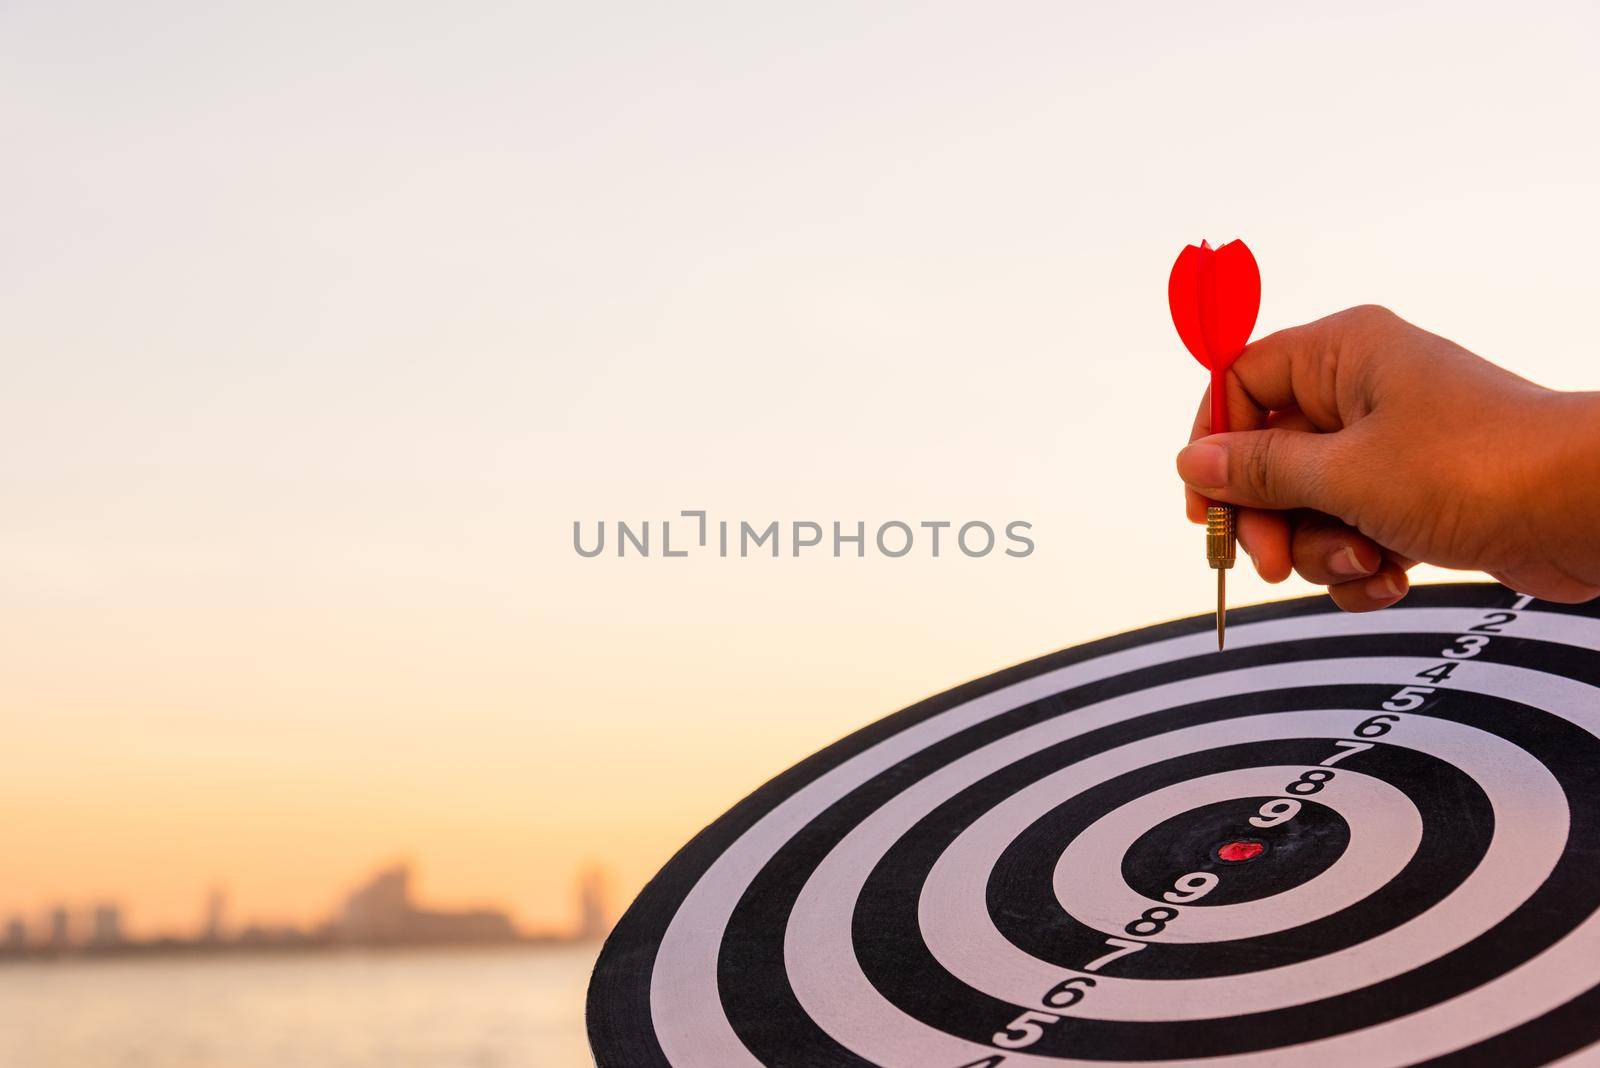 Hand hold of dart arrow on bullseye (bull's-eye) dartboard is the target of purpose challenge business at sunset, expert marketing strategy target, objective financial and goal success